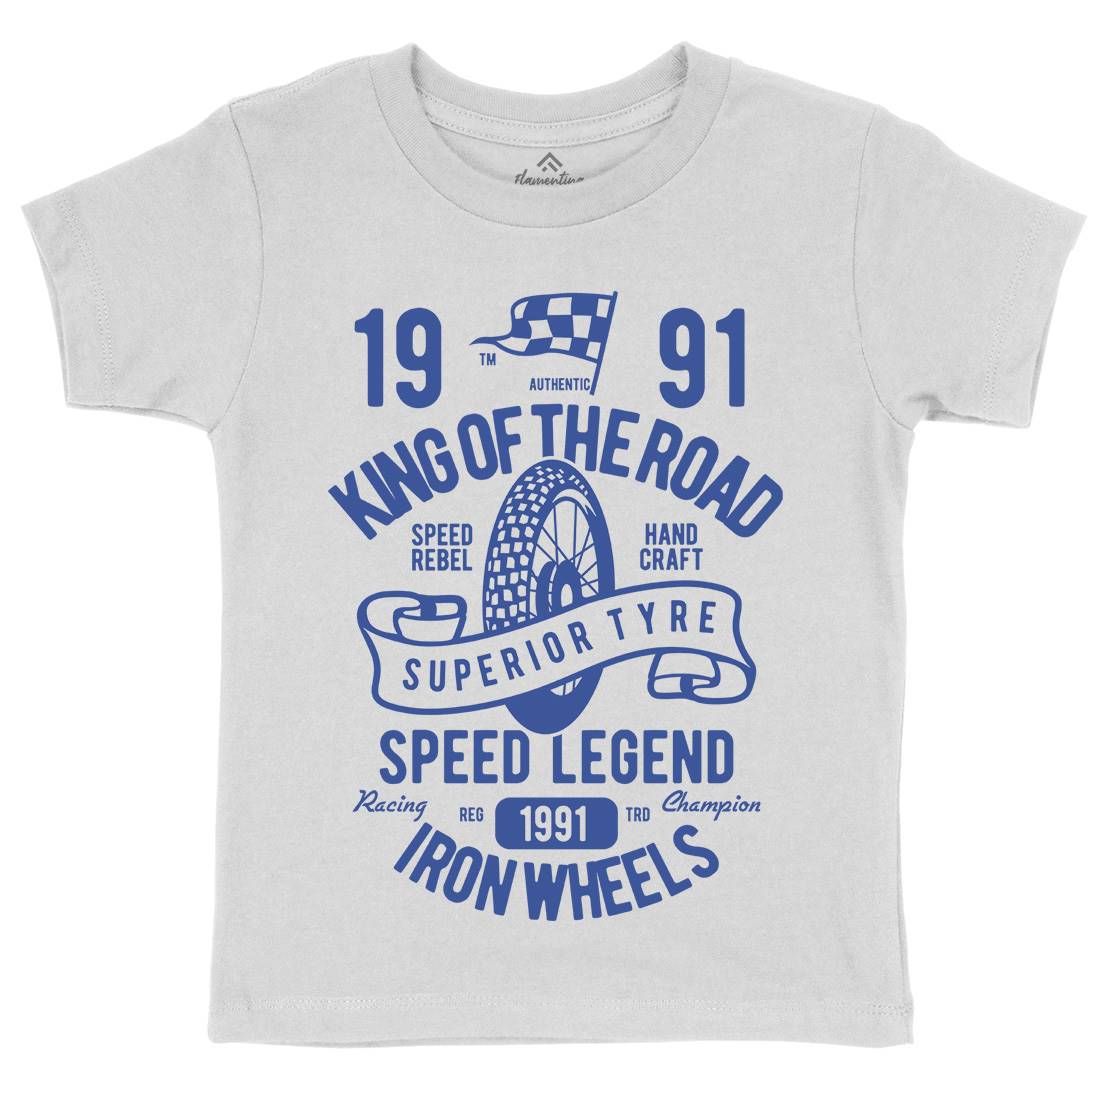 Superior Tyre King Of The Road Kids Crew Neck T-Shirt Motorcycles B458